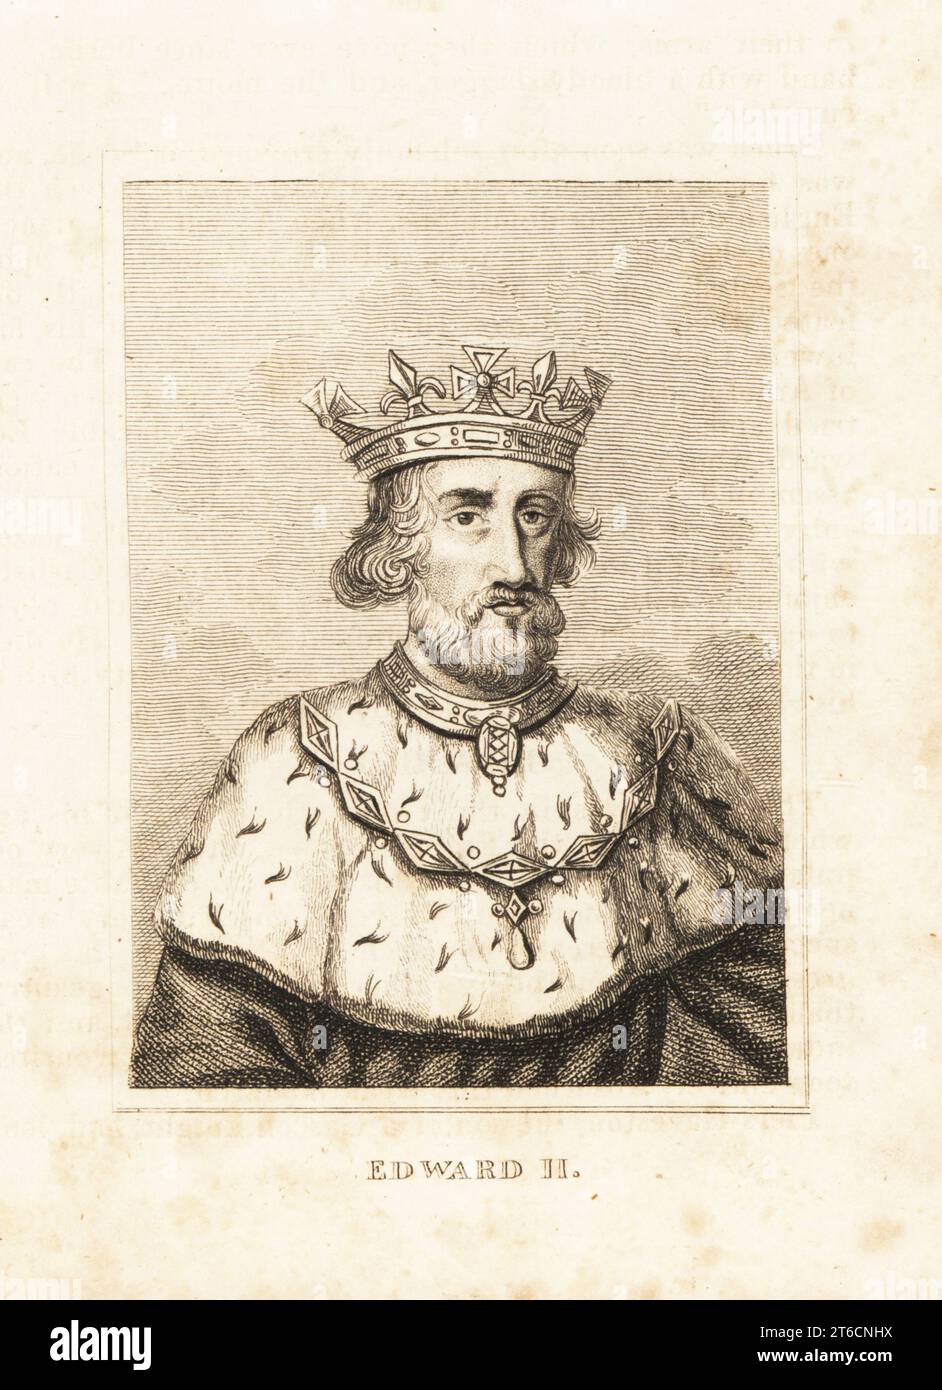 Portrait of King Edward II, 1284-1327, wearing crown, ermine collar, cloak and gold chain. Copperplate engraving from M. A. Jones History of England from Julius Caesar to George IV, G. Virtue, 26 Ivy Lane, London, 1836. Stock Photo